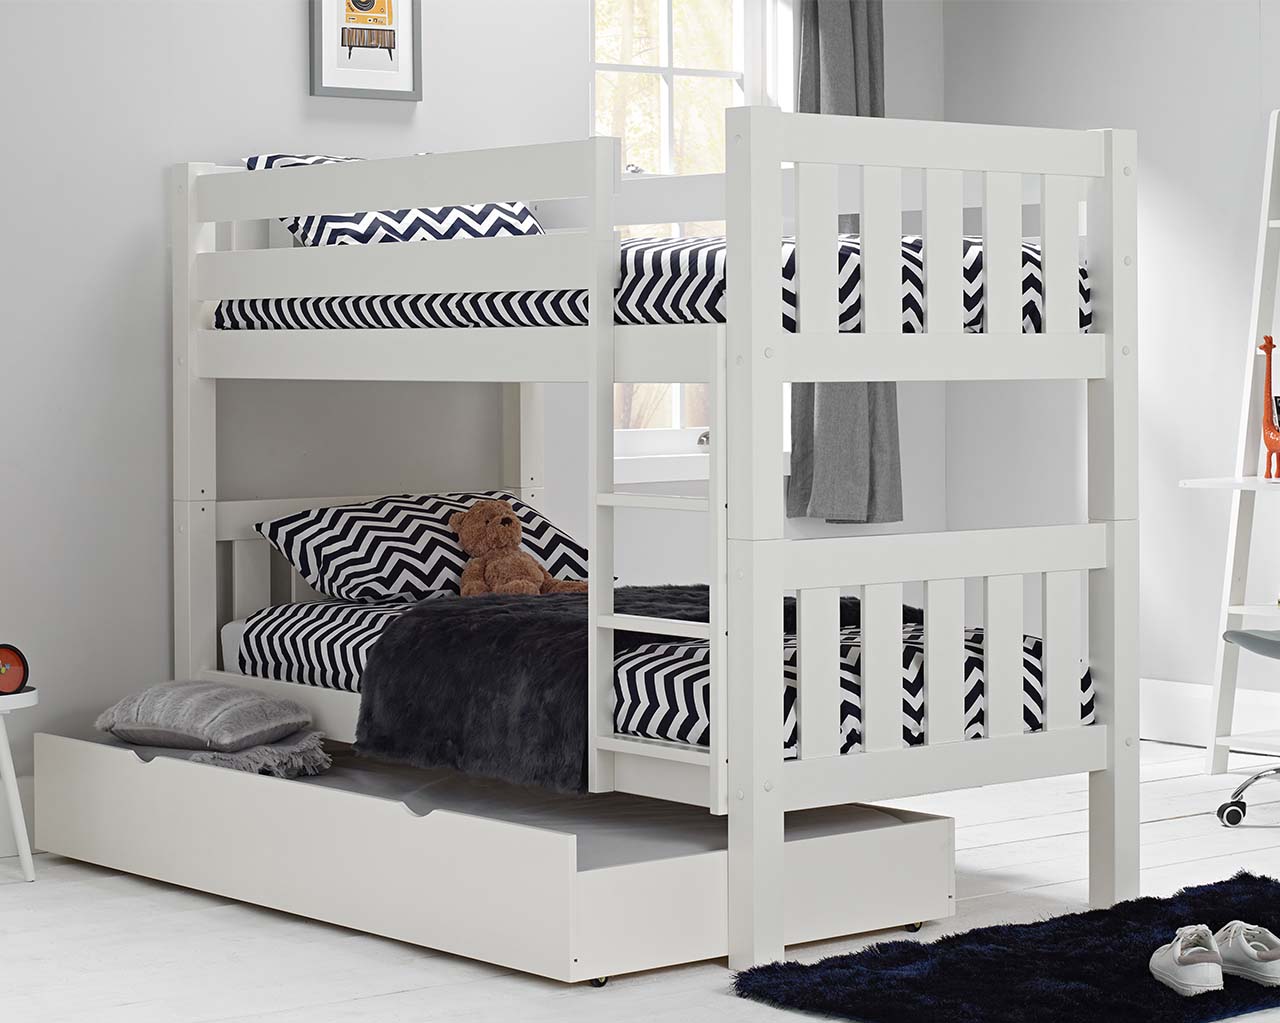 Jubilee bunk bed with storage trundle